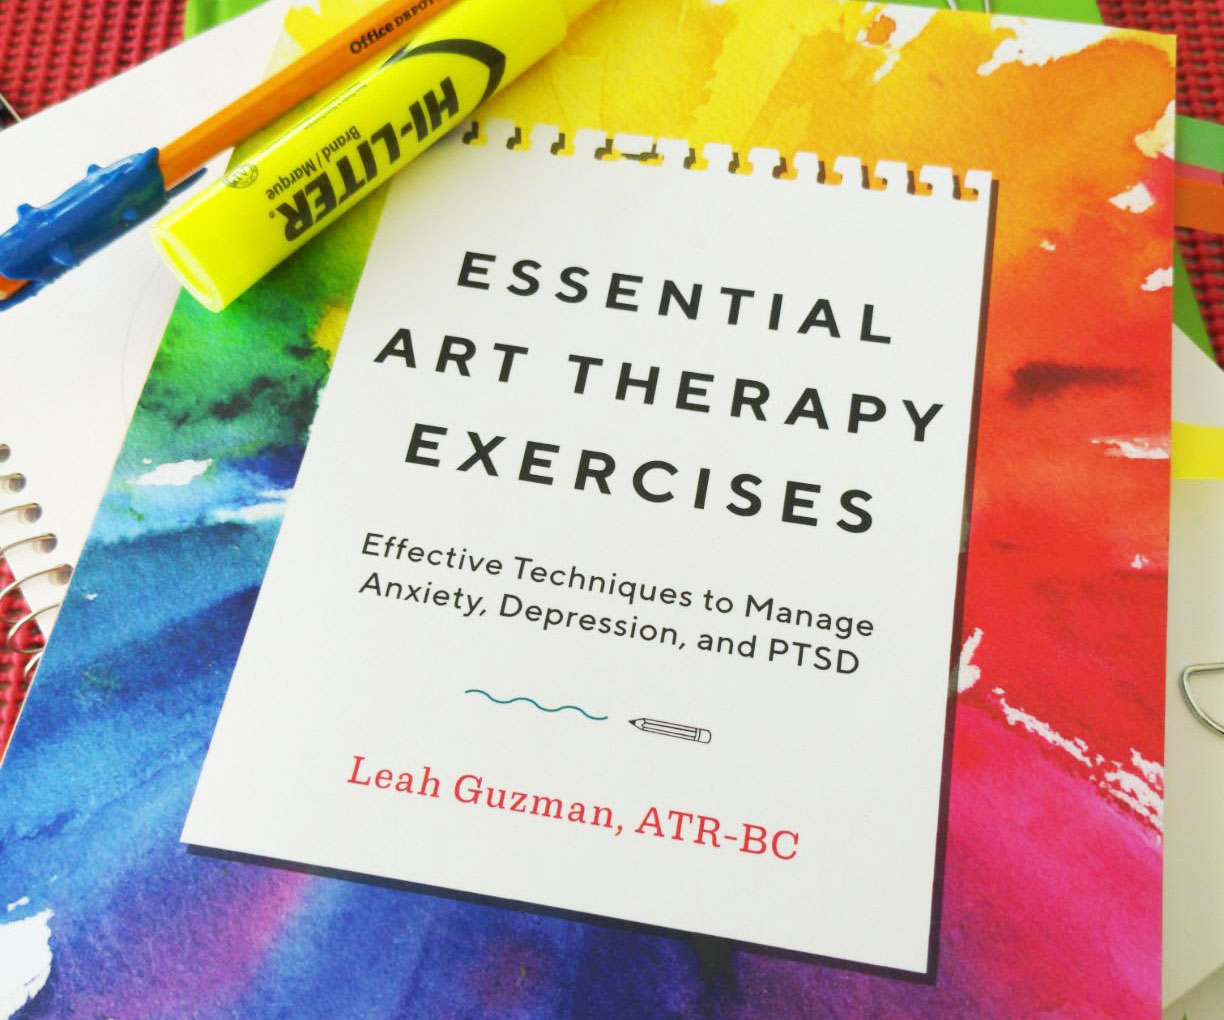 Essential Art Therapy Exercises